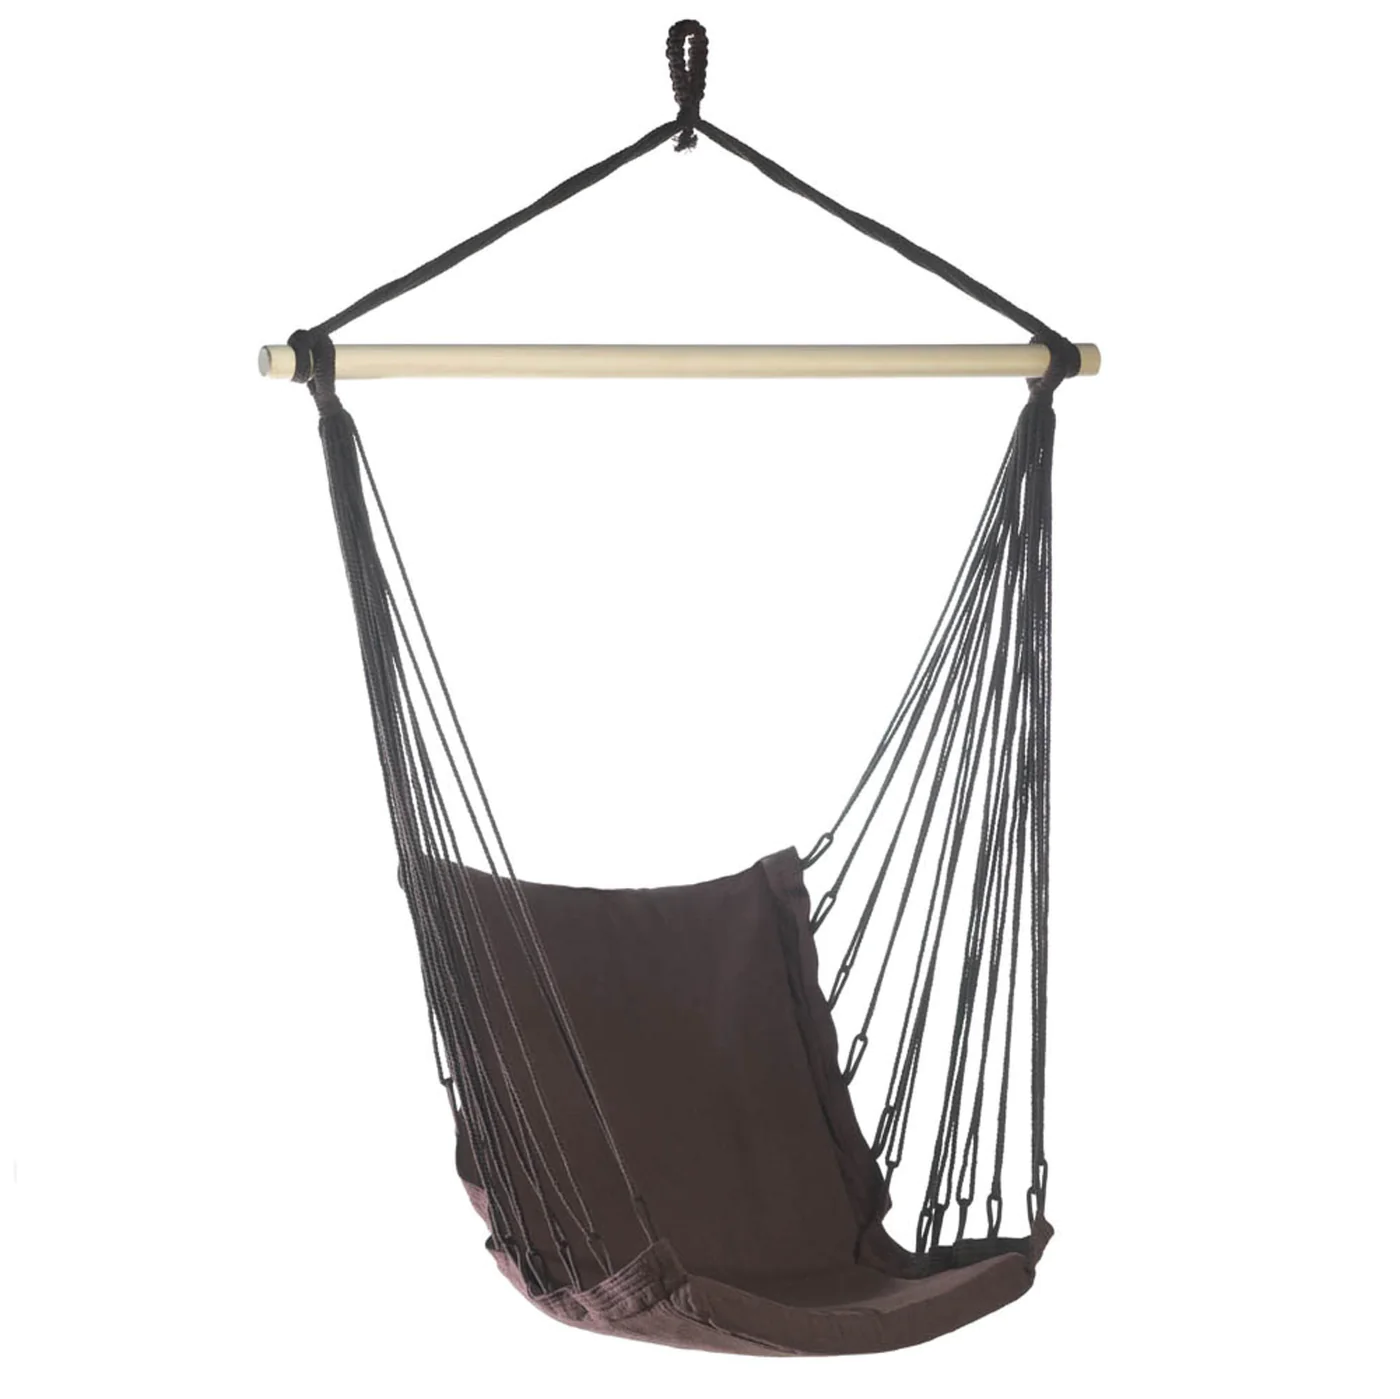 ESPRESSO COTTON PADDED SWING CHAIR - $55.14